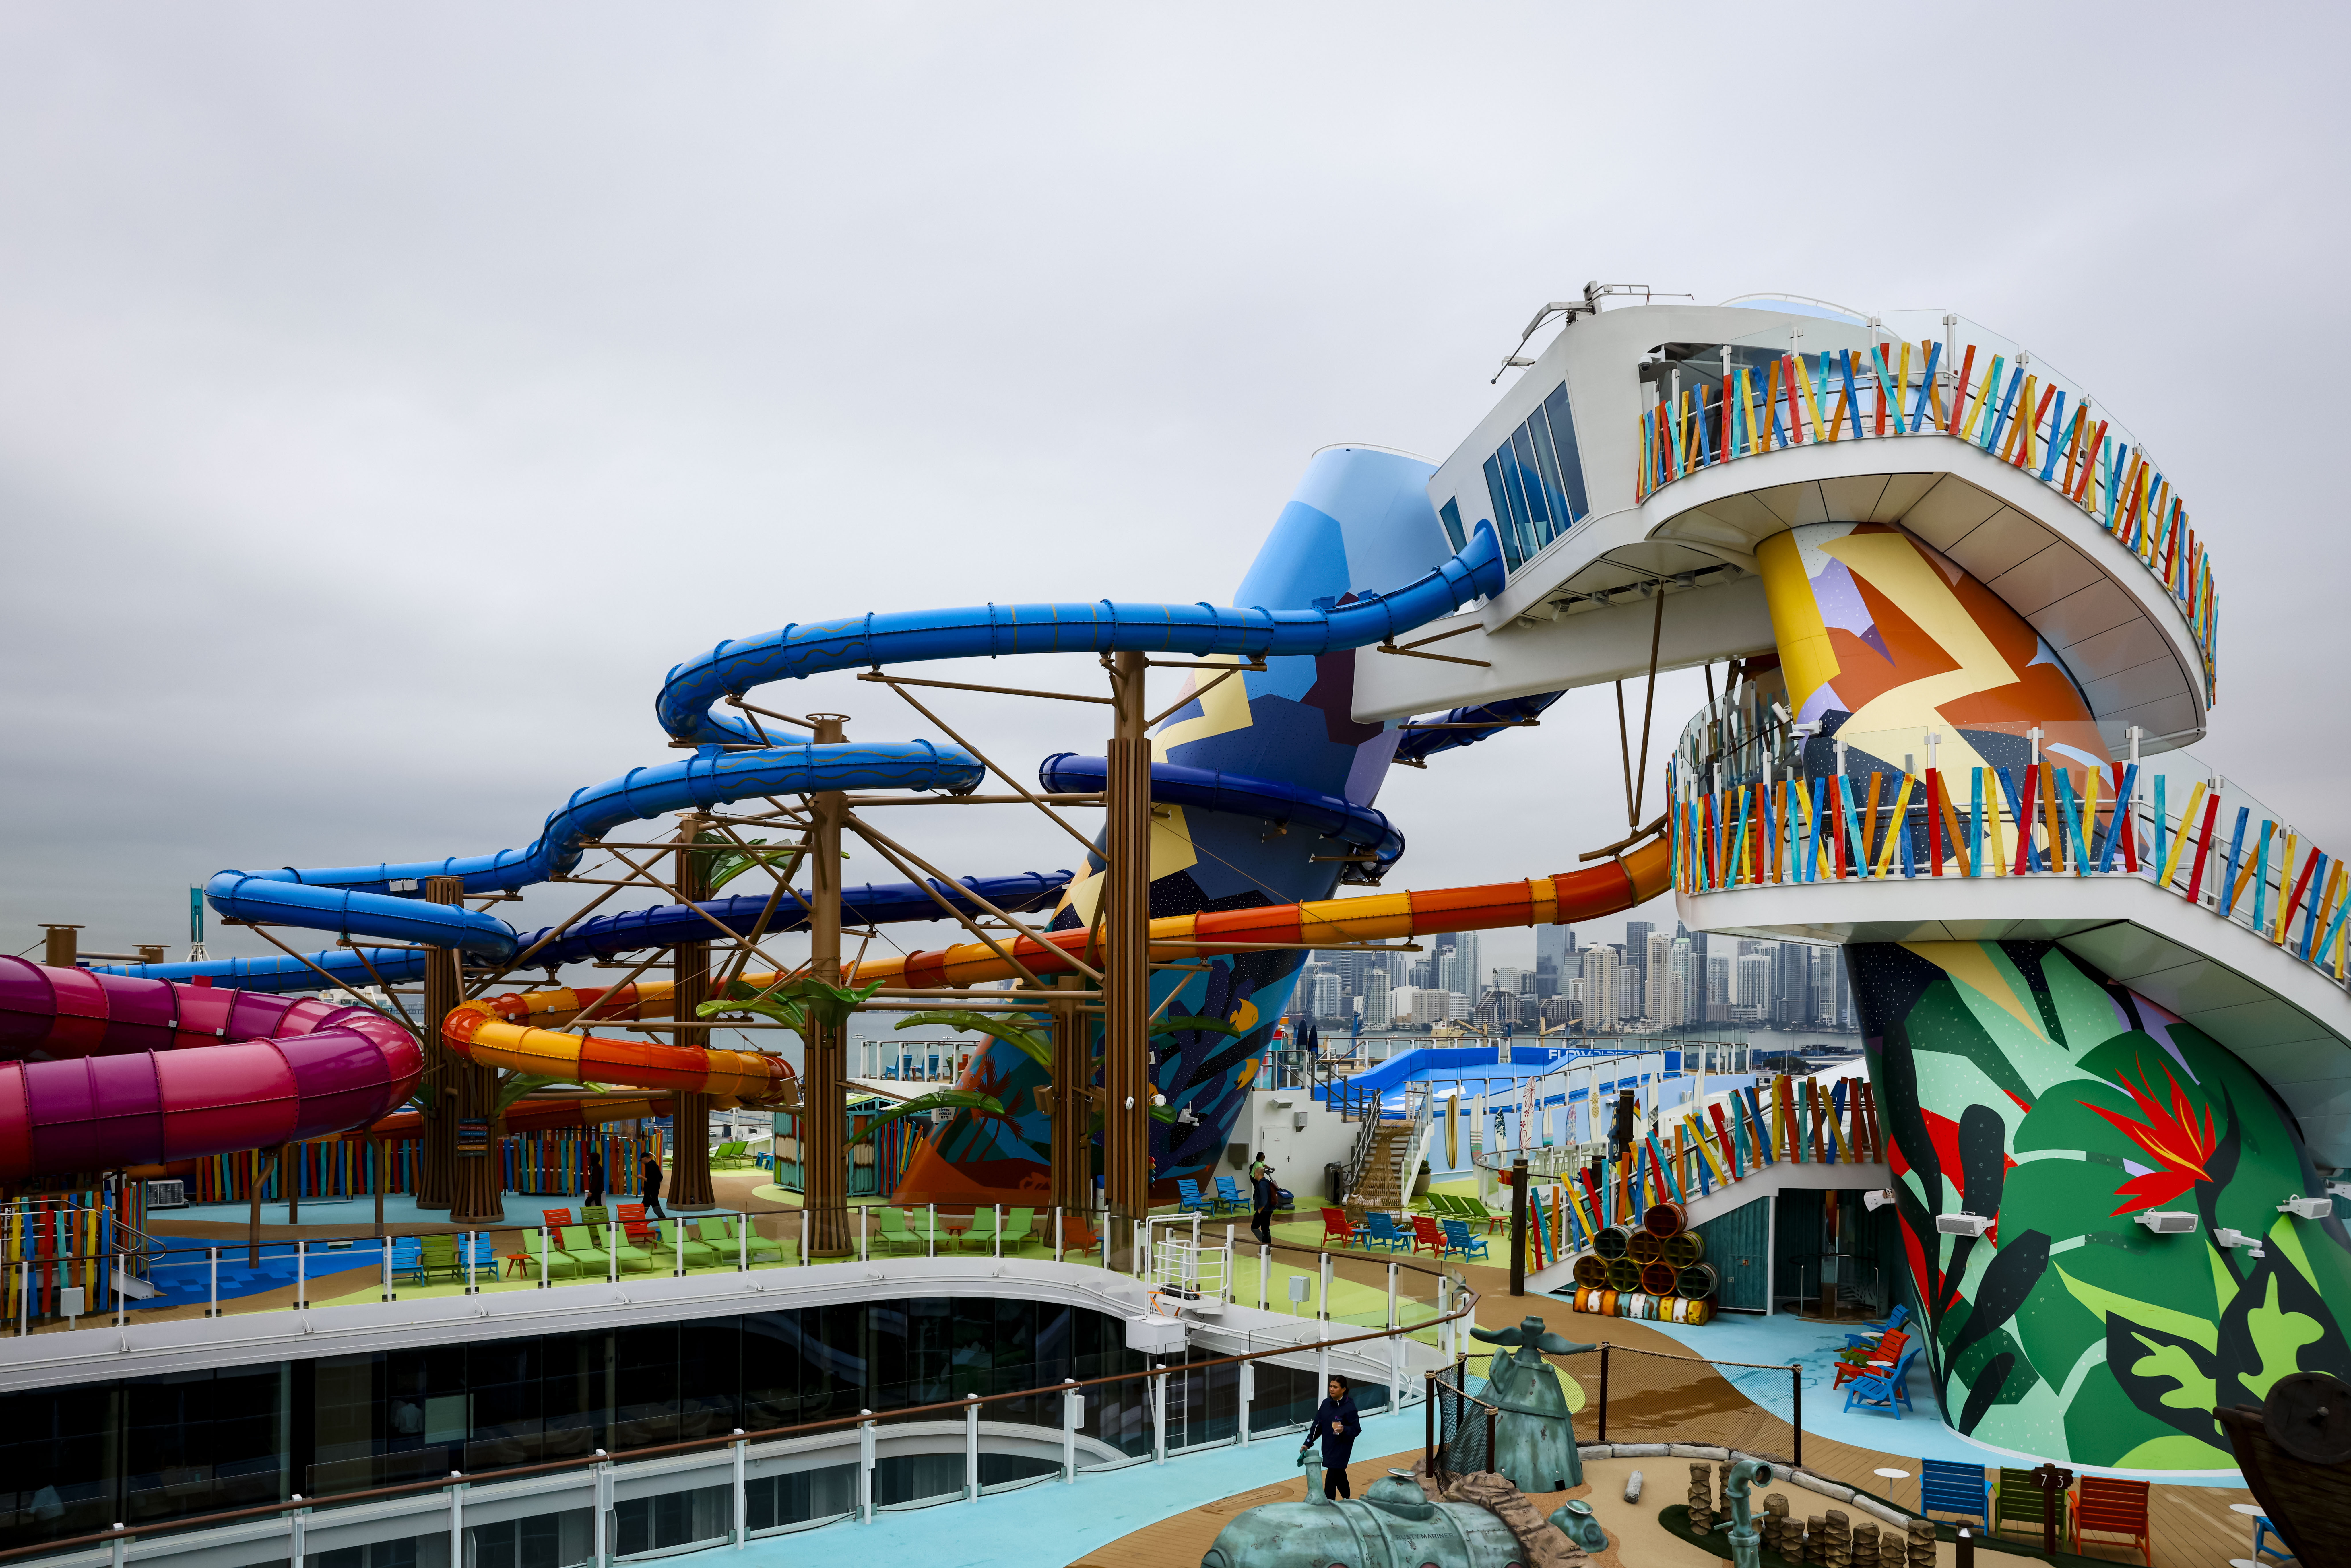 There are also six water slides for the guests